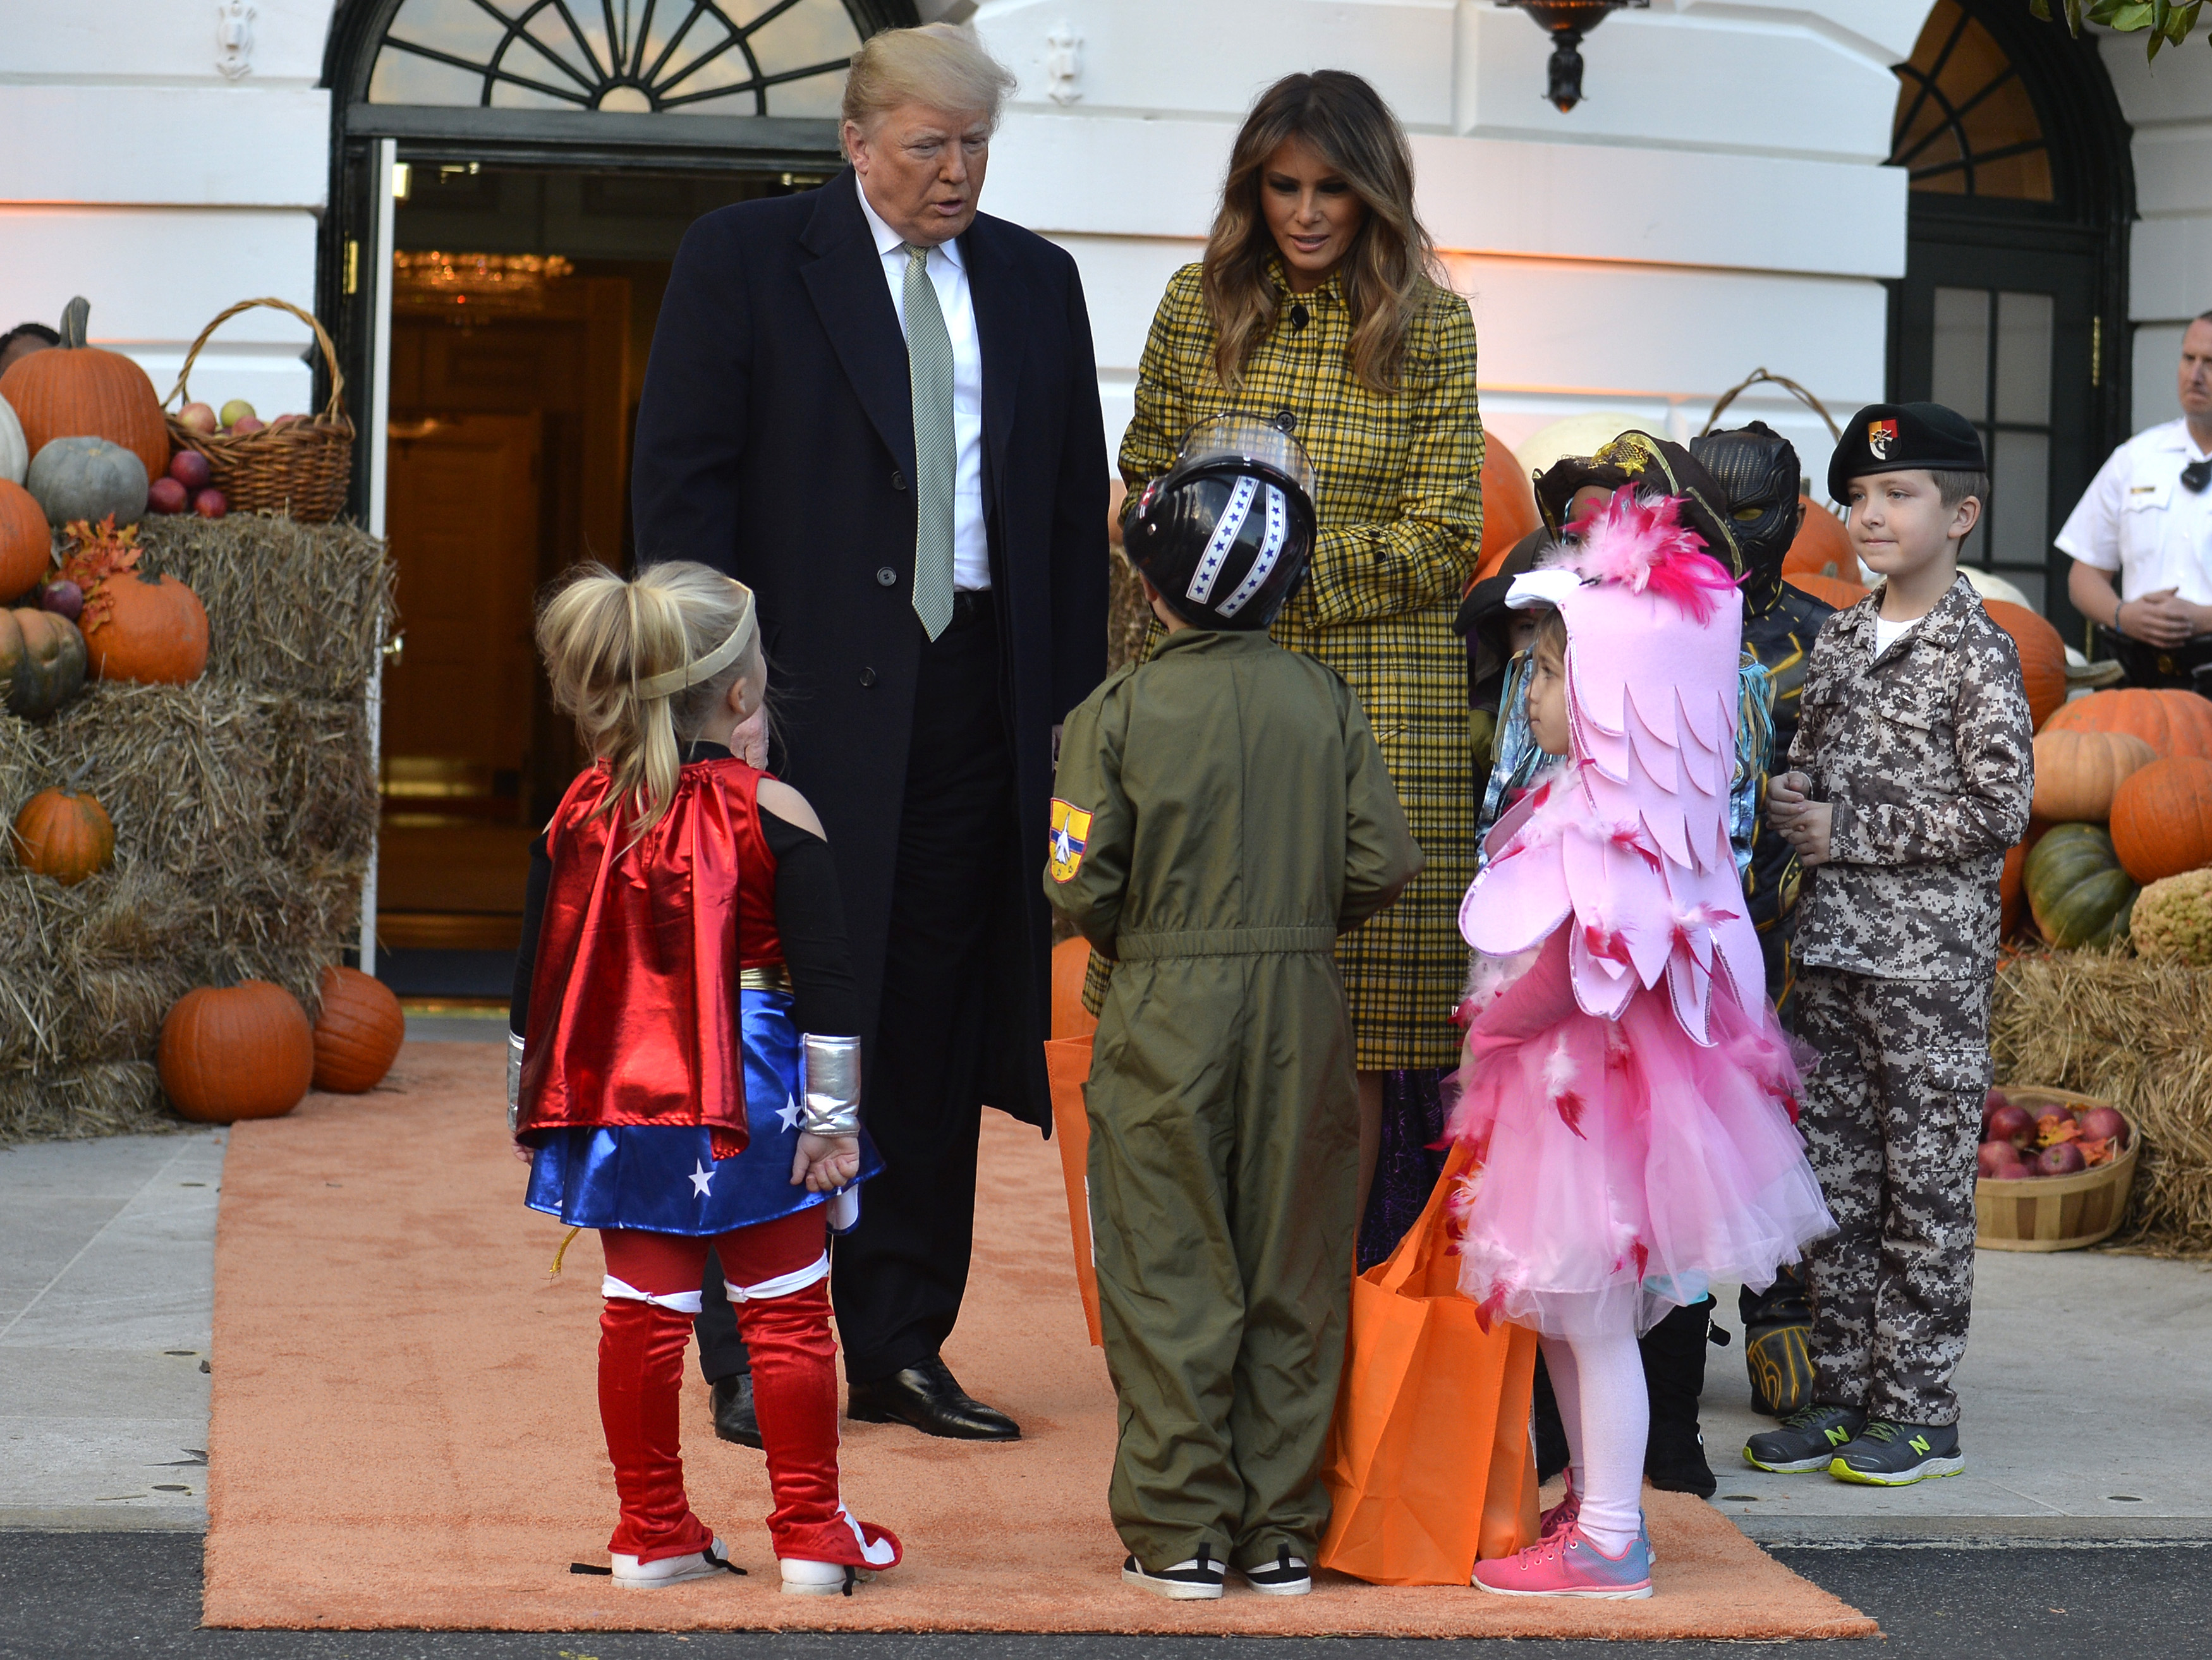 Trump and First Lady Welcome Children for Halloween at White House